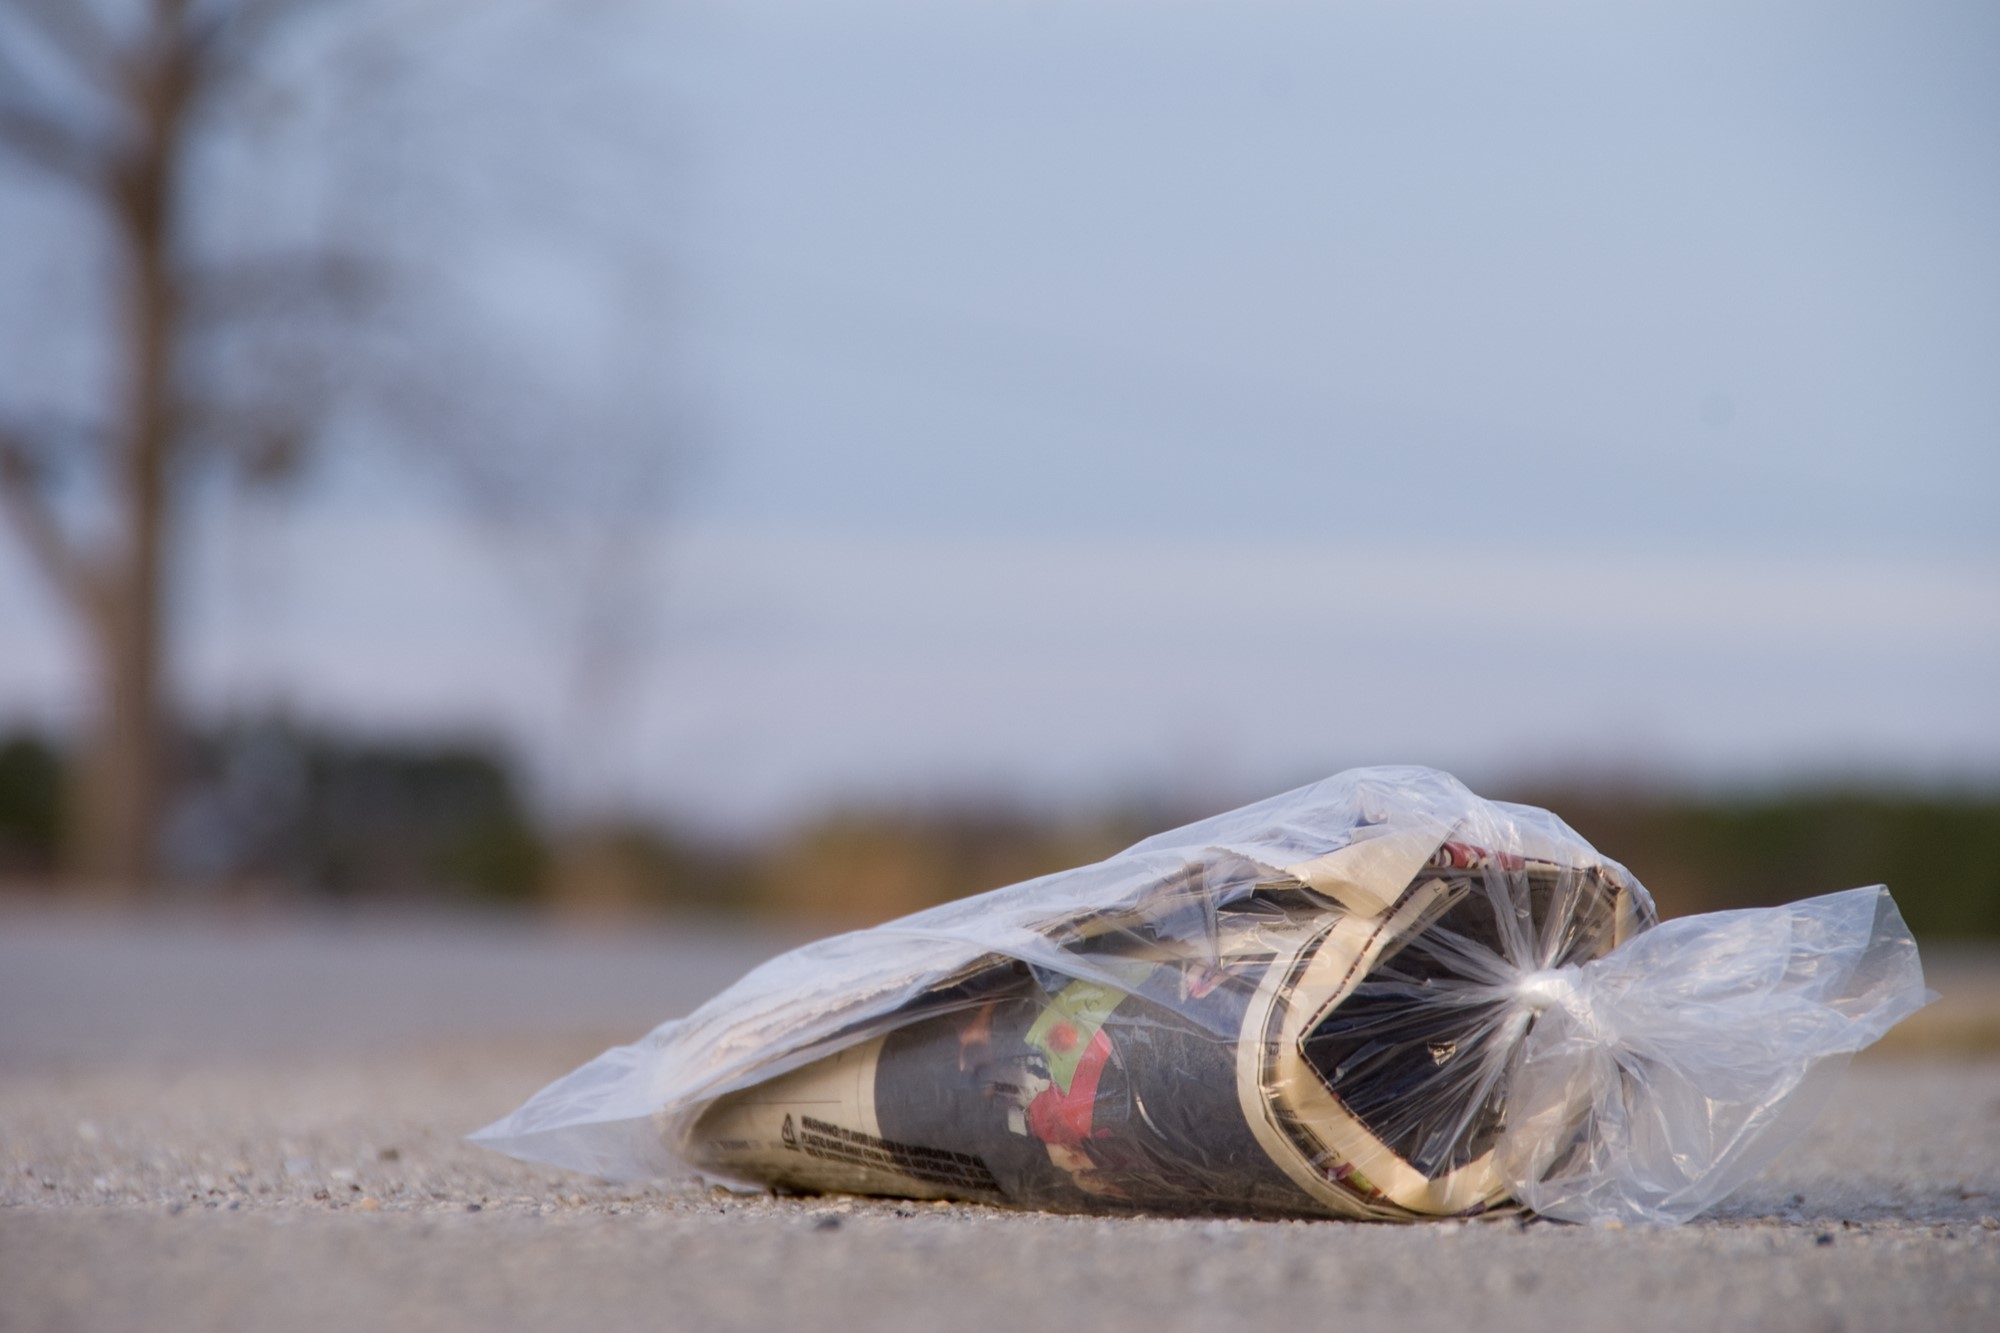 photograph of bagged newspaper abandoned on road